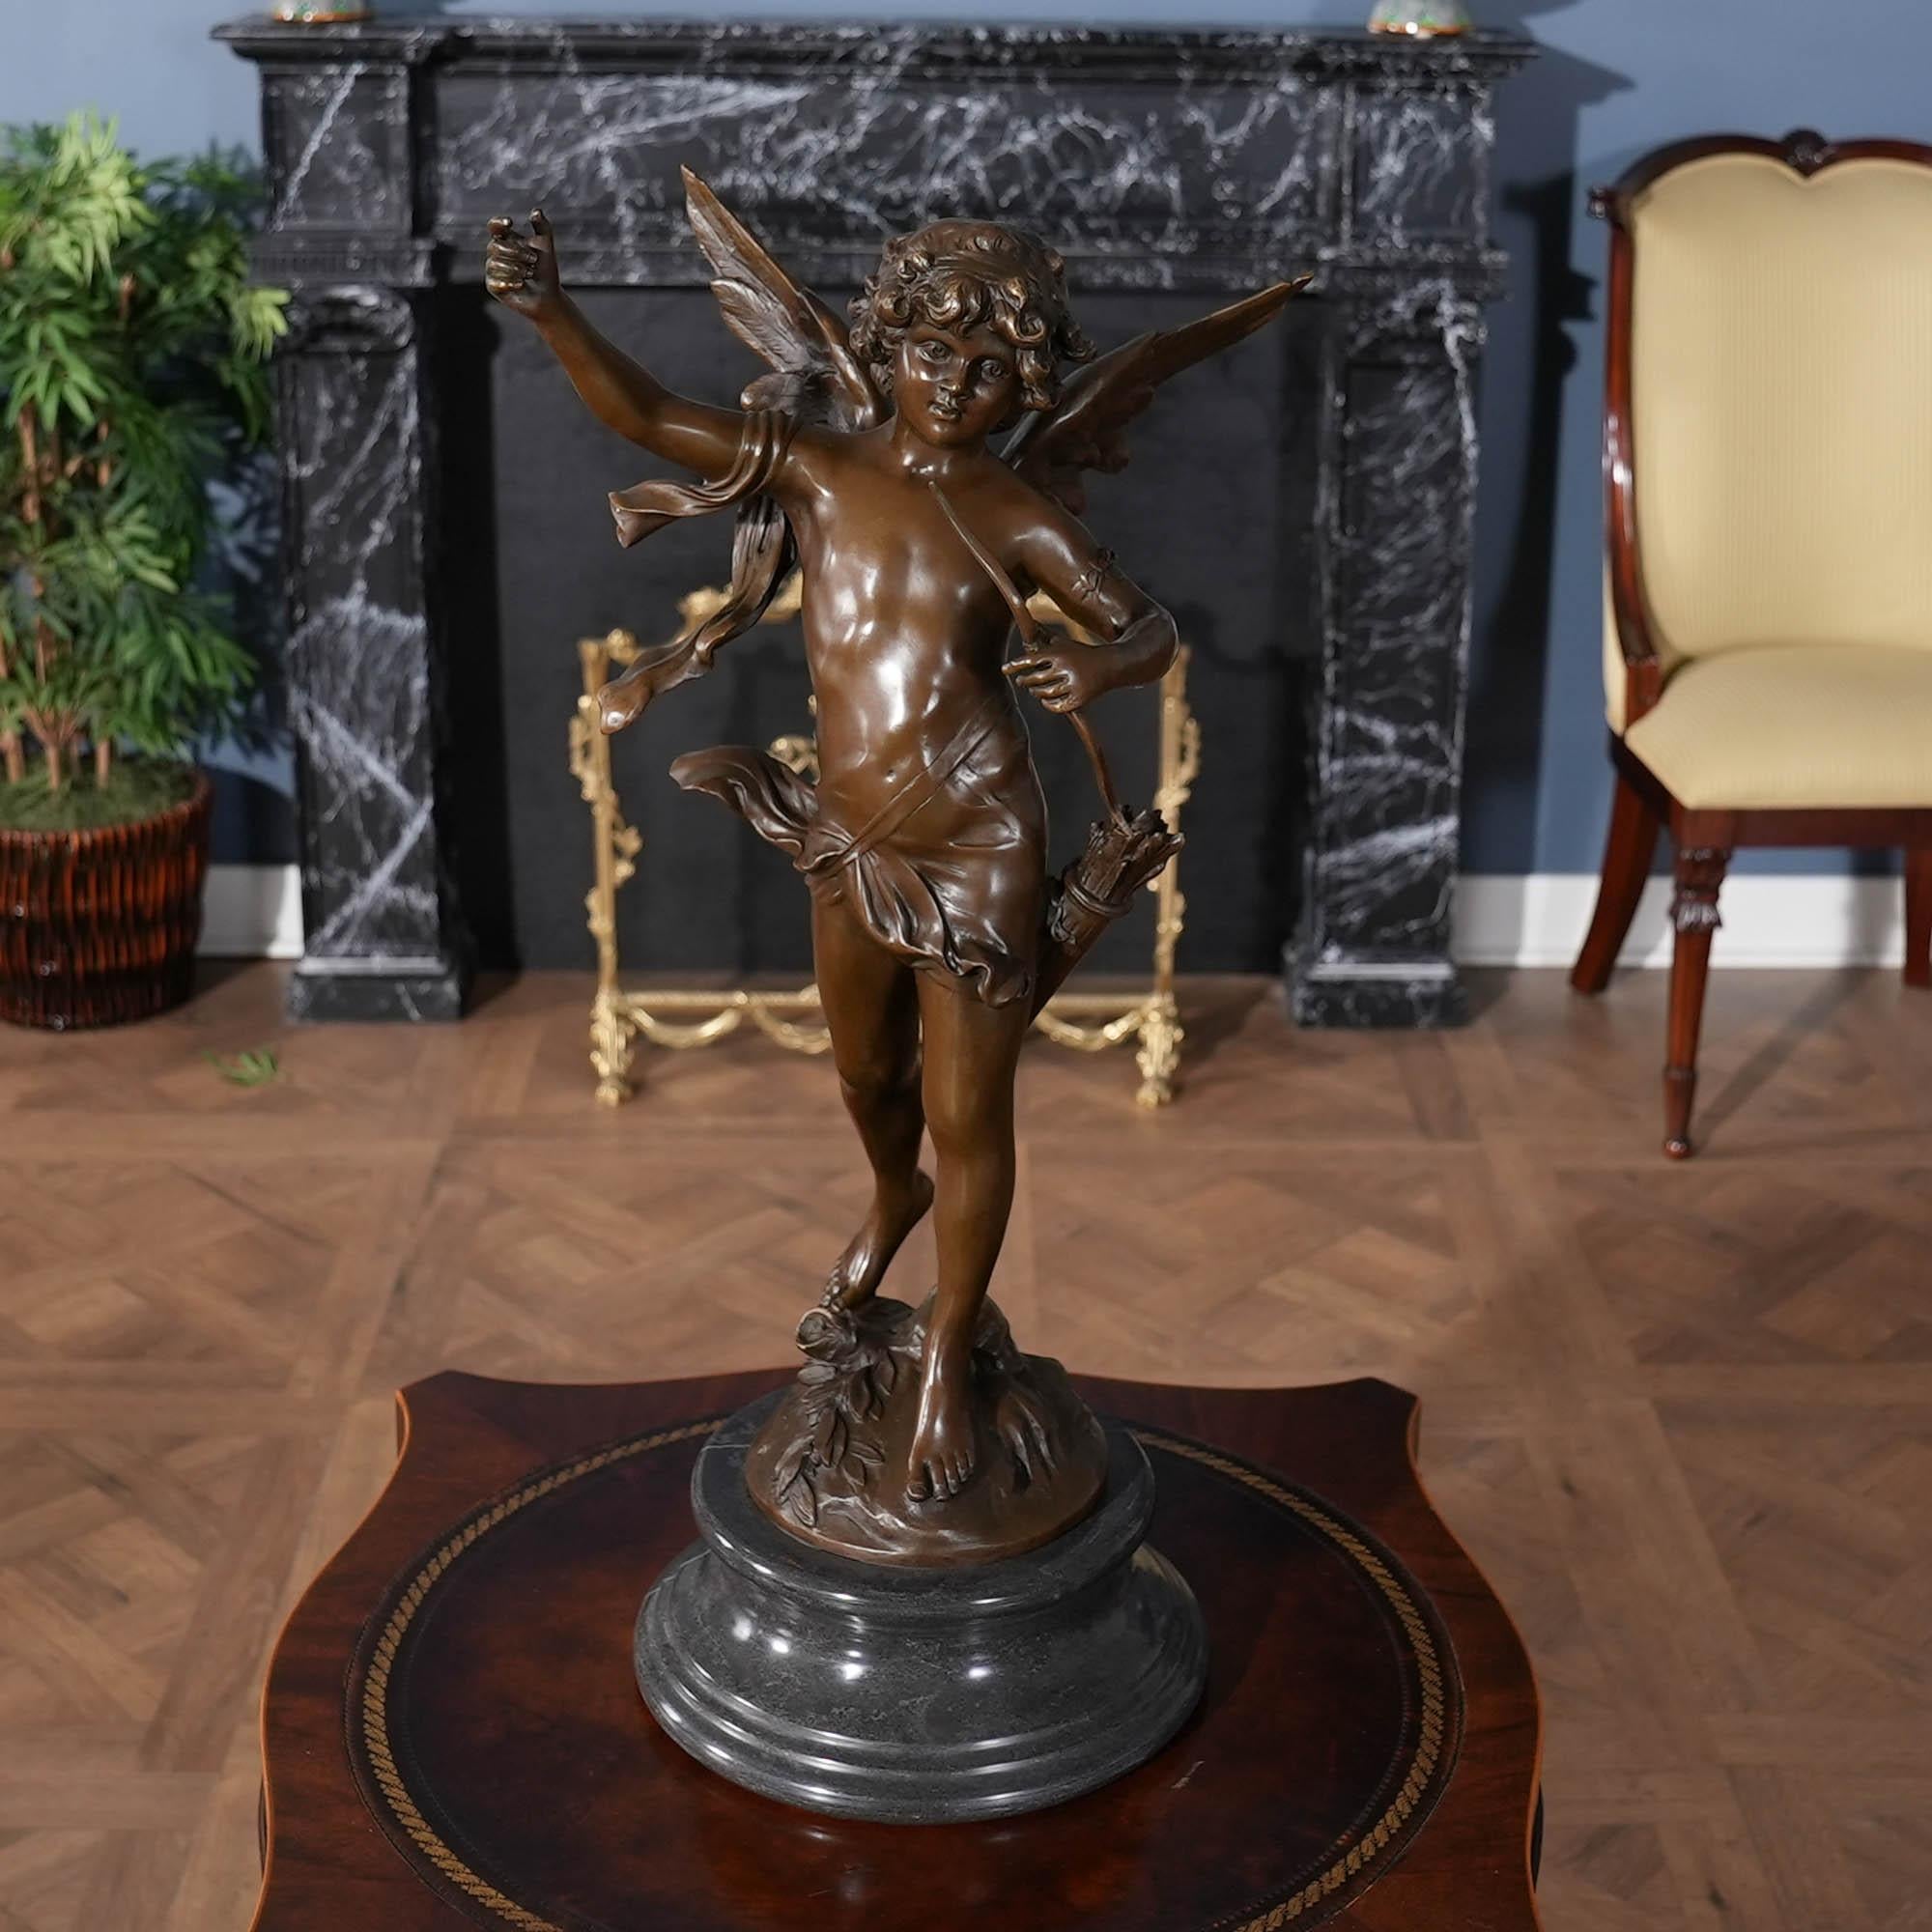 Graceful even when standing still the Bronze Cherub on Marble Base is a striking addition to any setting. Using traditional lost wax casting methods the Bronze Cherub statue has hand chaised details added to give a high level of detail to the